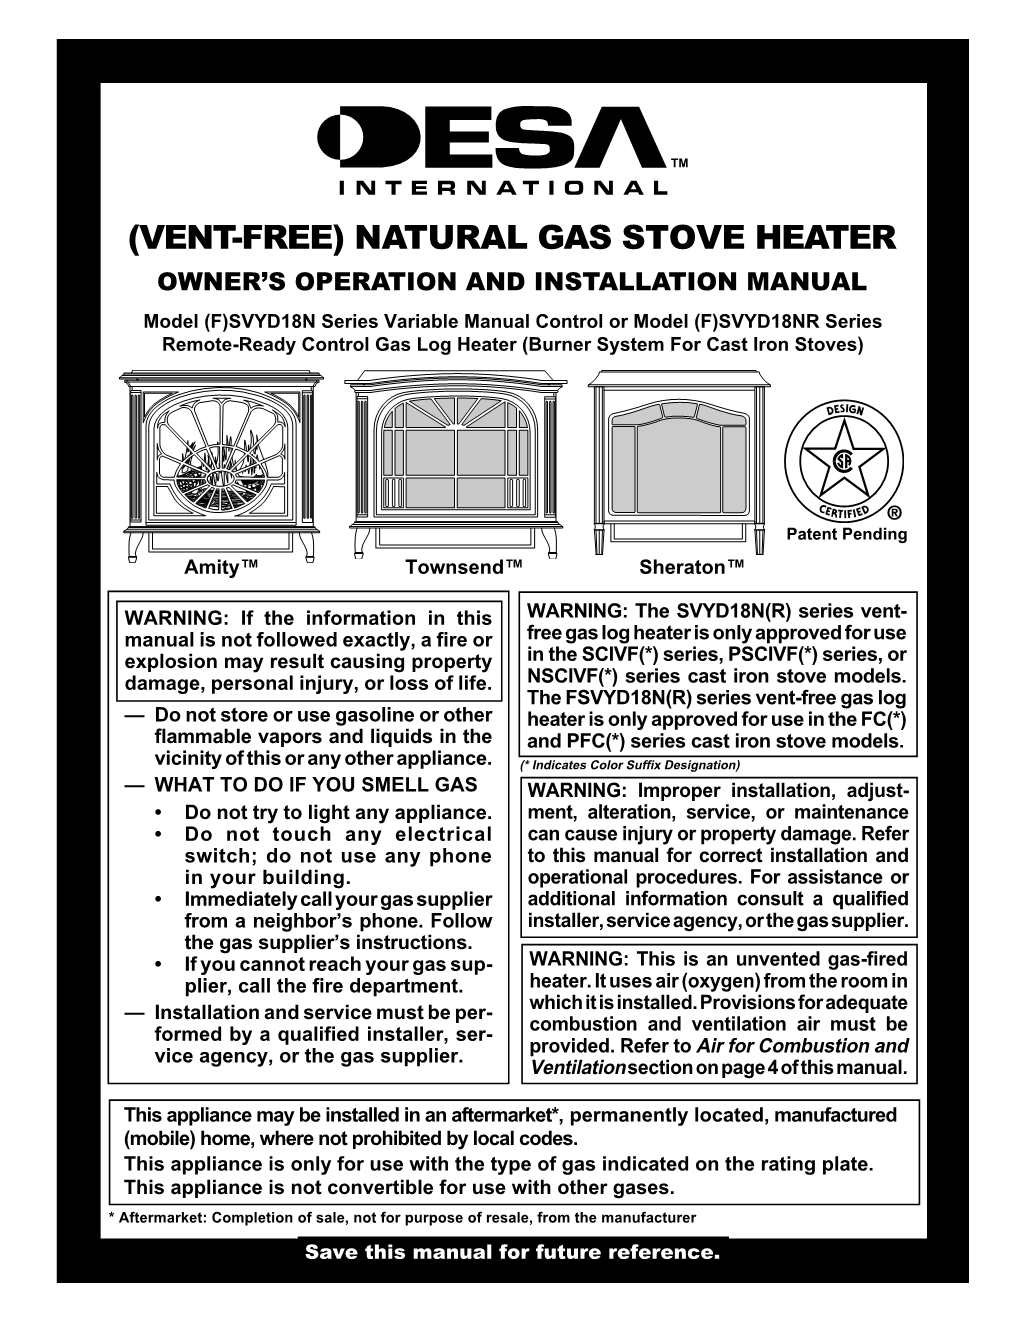 Natural Gas Stove Heater